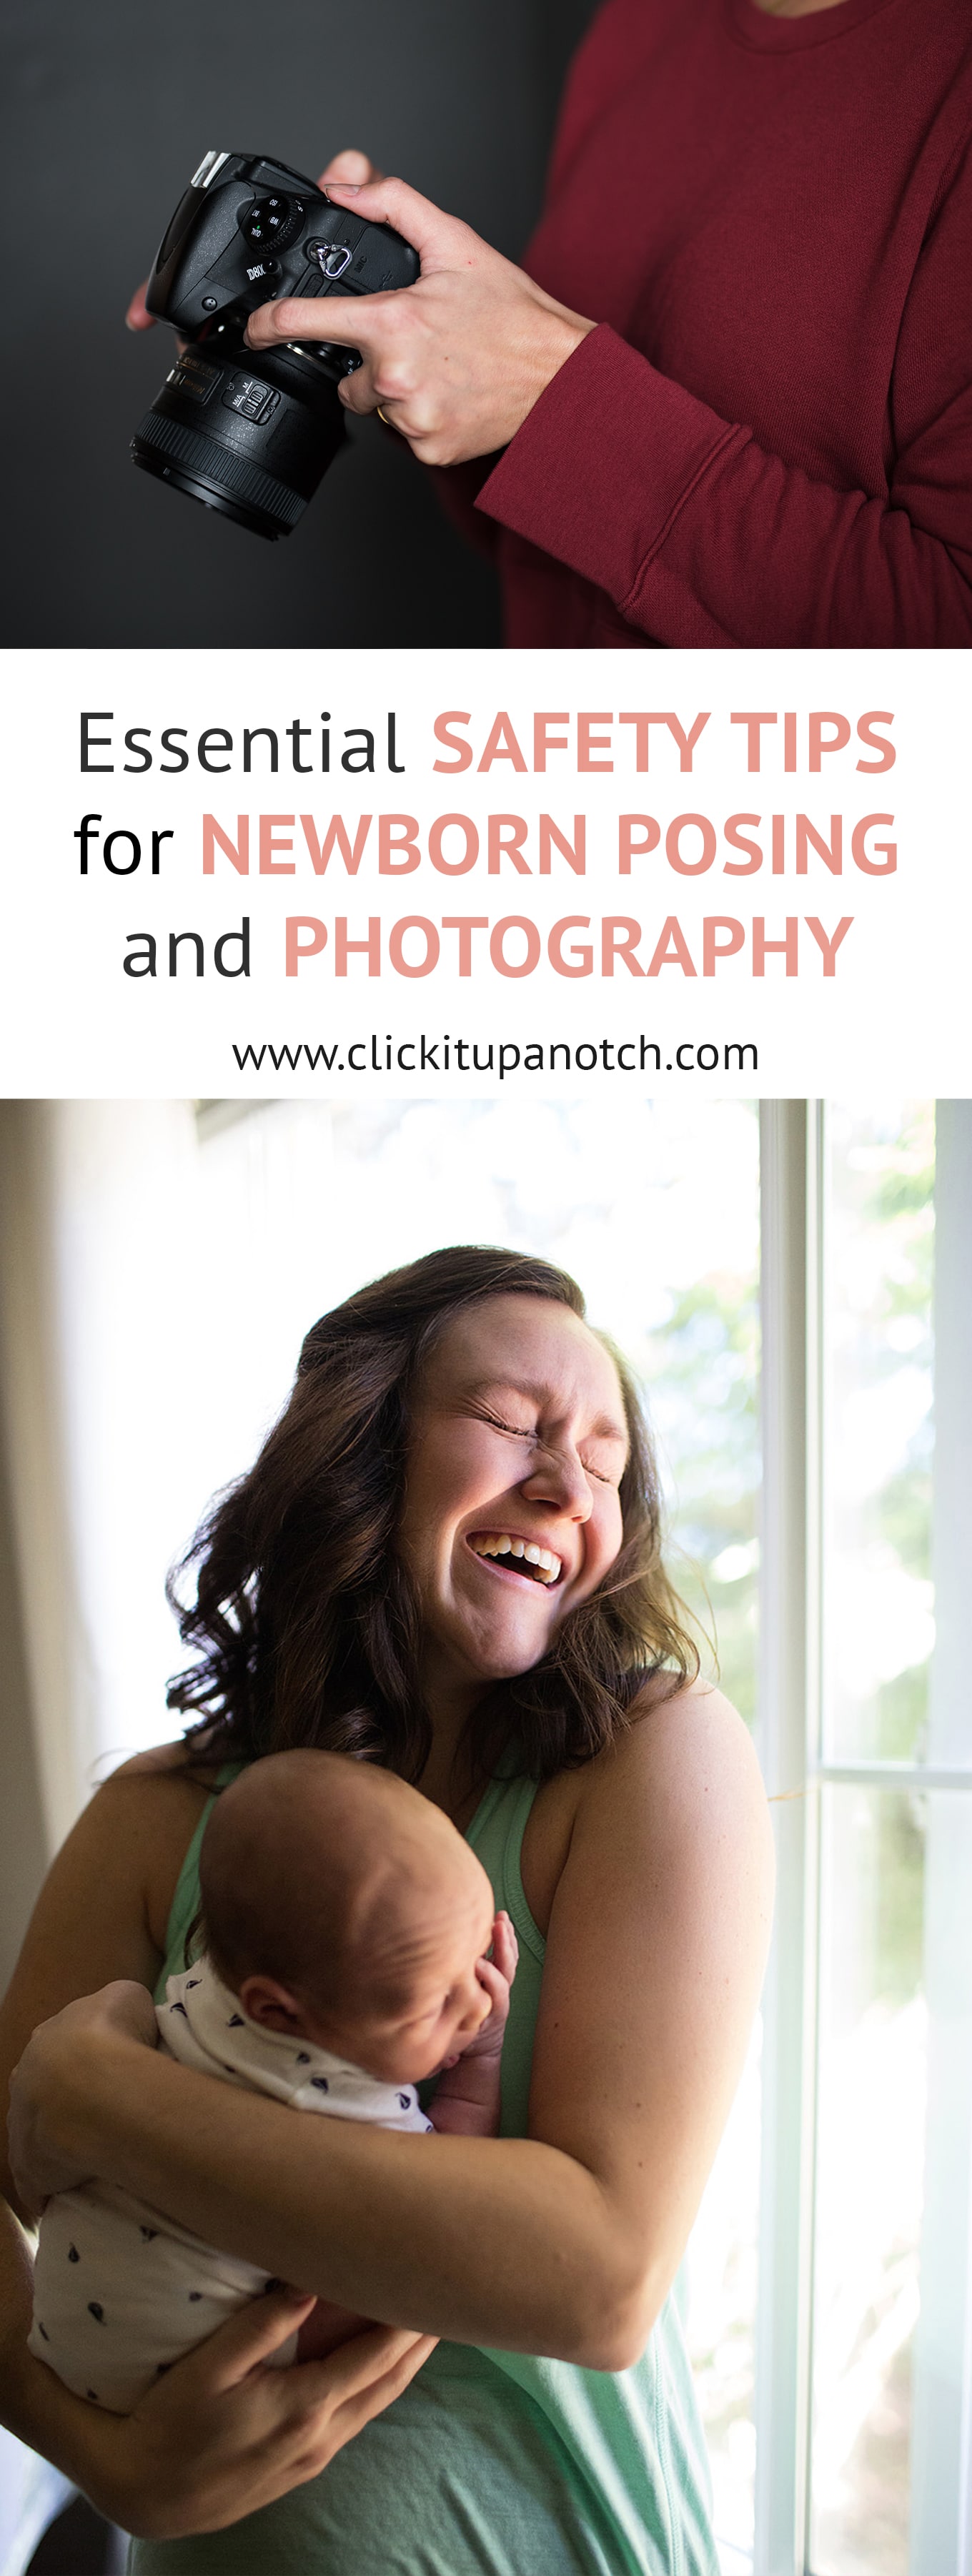 These tips come from a former NICU nurse. There are bunch of unexpected safety tips I never knew of. Read - "Essential Safety Tips for Newborn Posing and Photography"